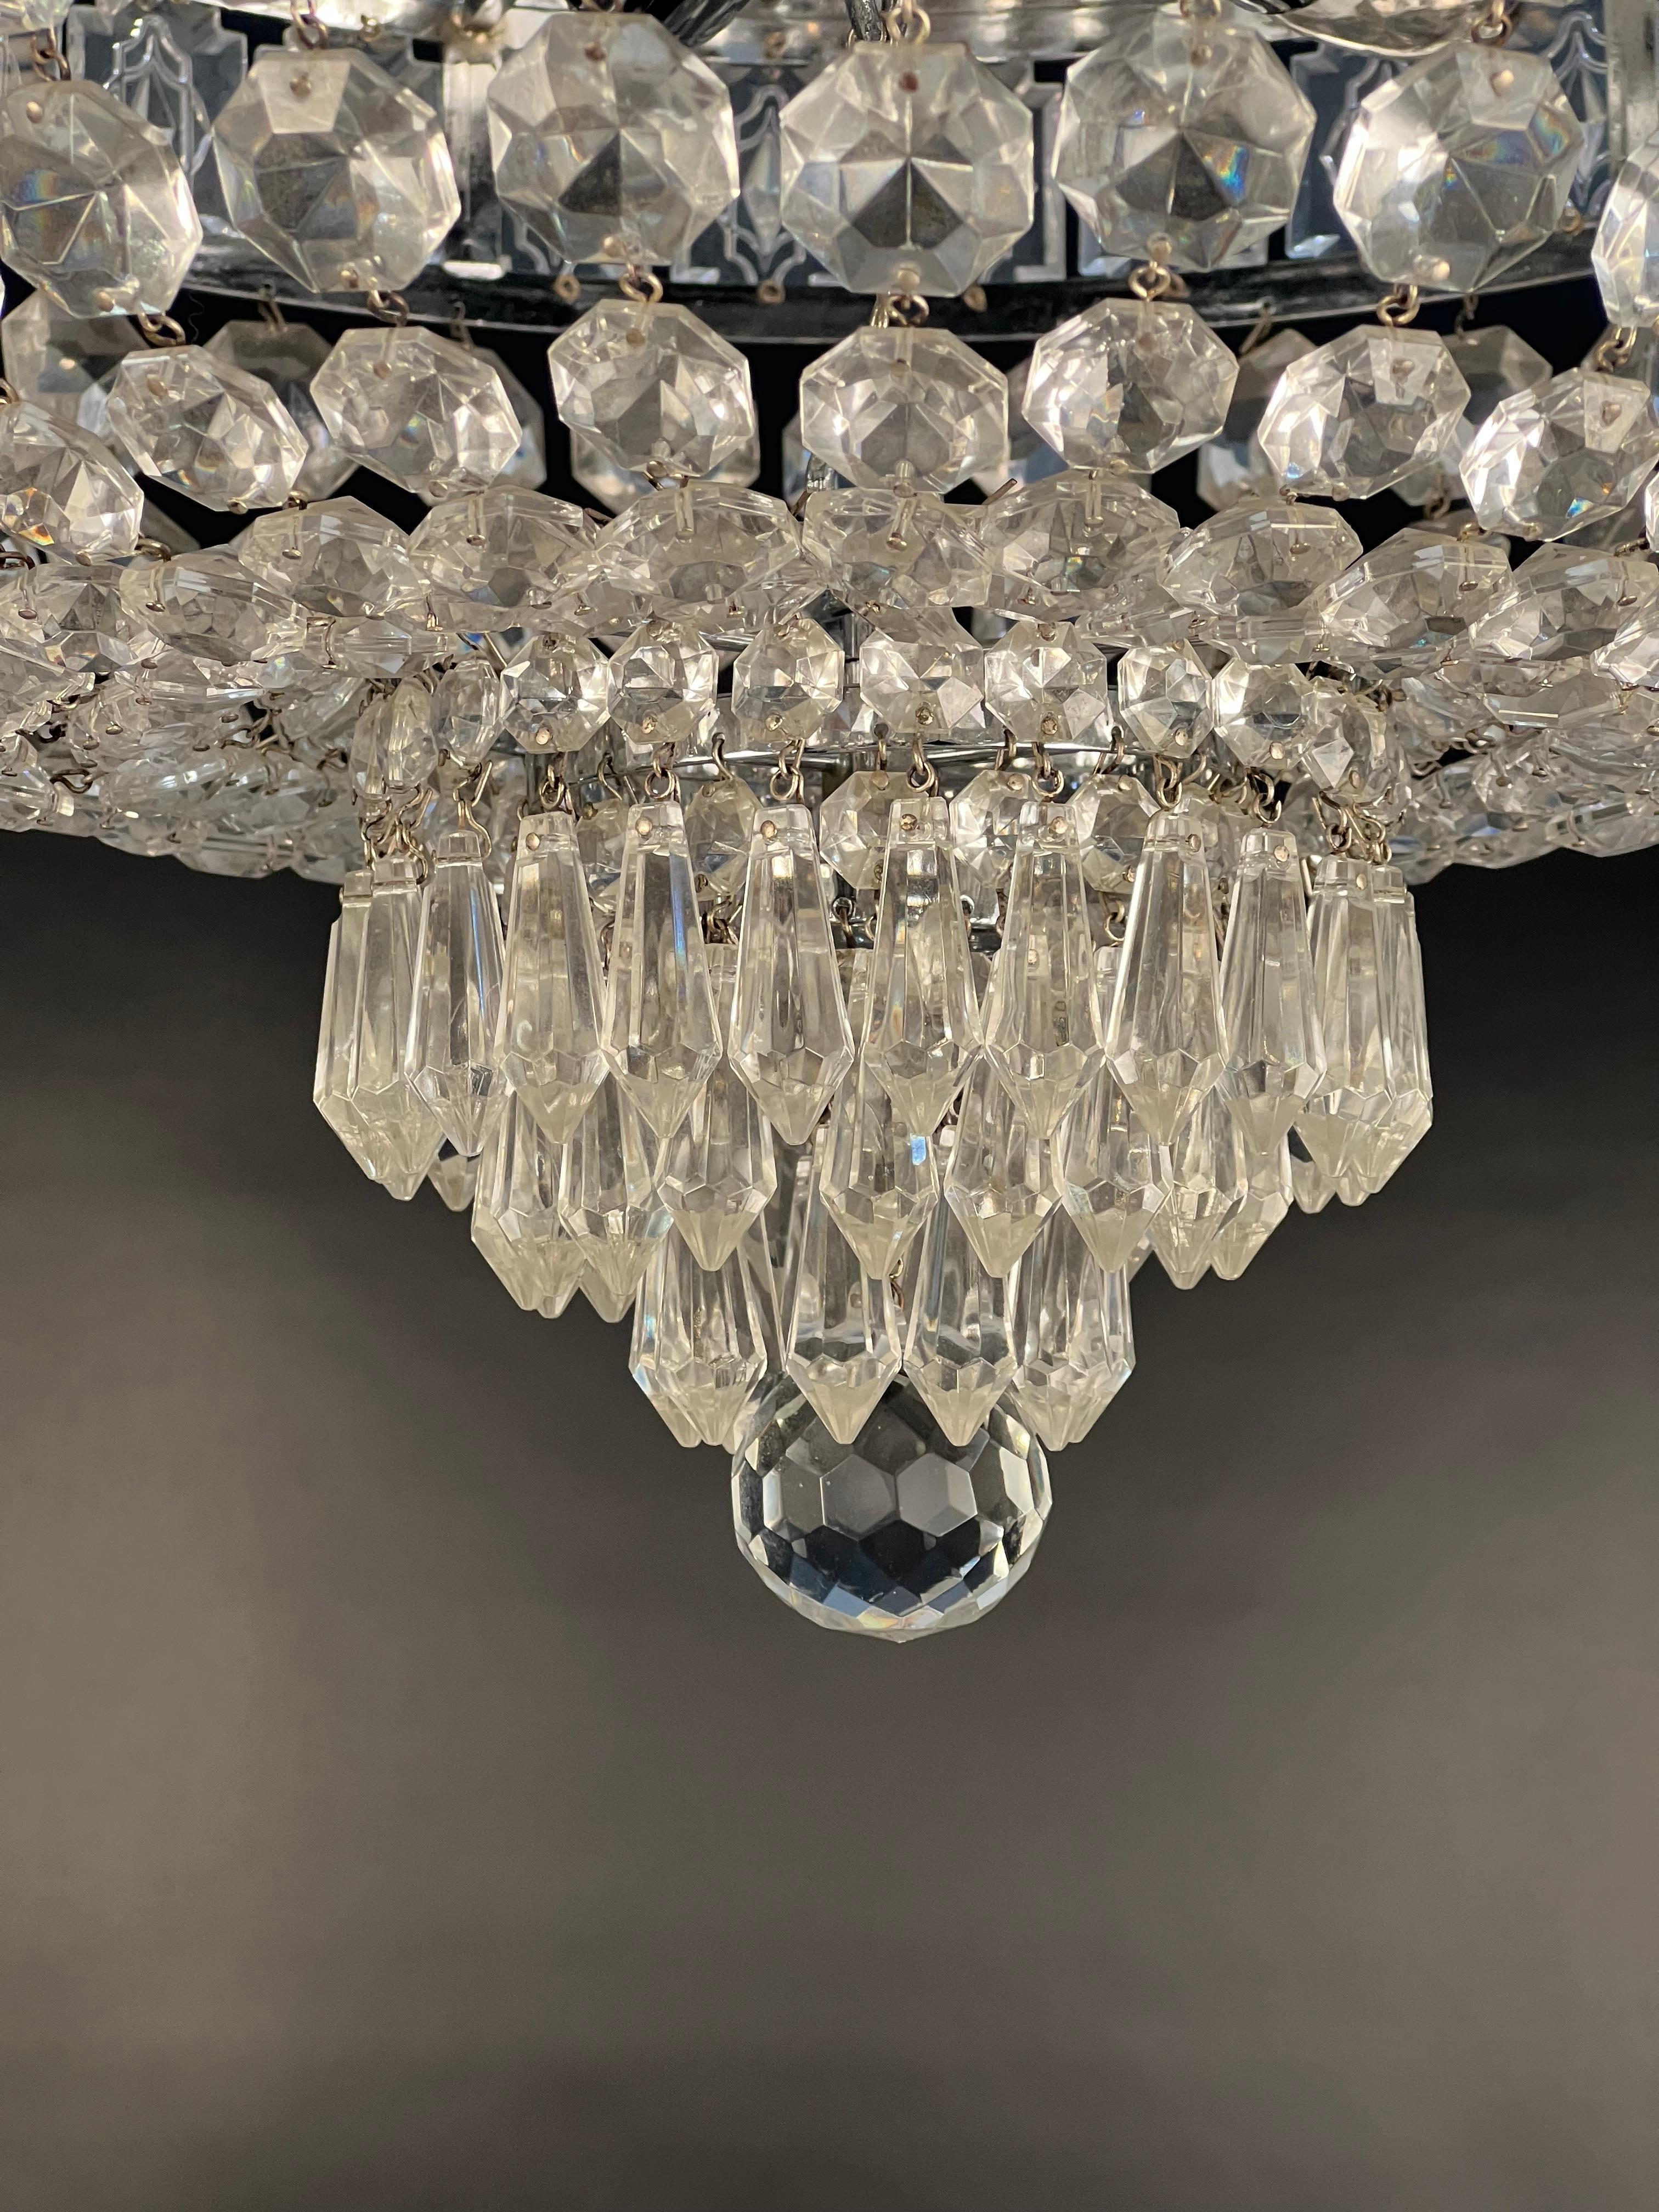 An empire style semi flush mount crystal basket featuring a central band of rectangular flat crystals with arched edges and etched design within the field. From the central band are graduating jewels leading to a three-tiered cluster of faceted